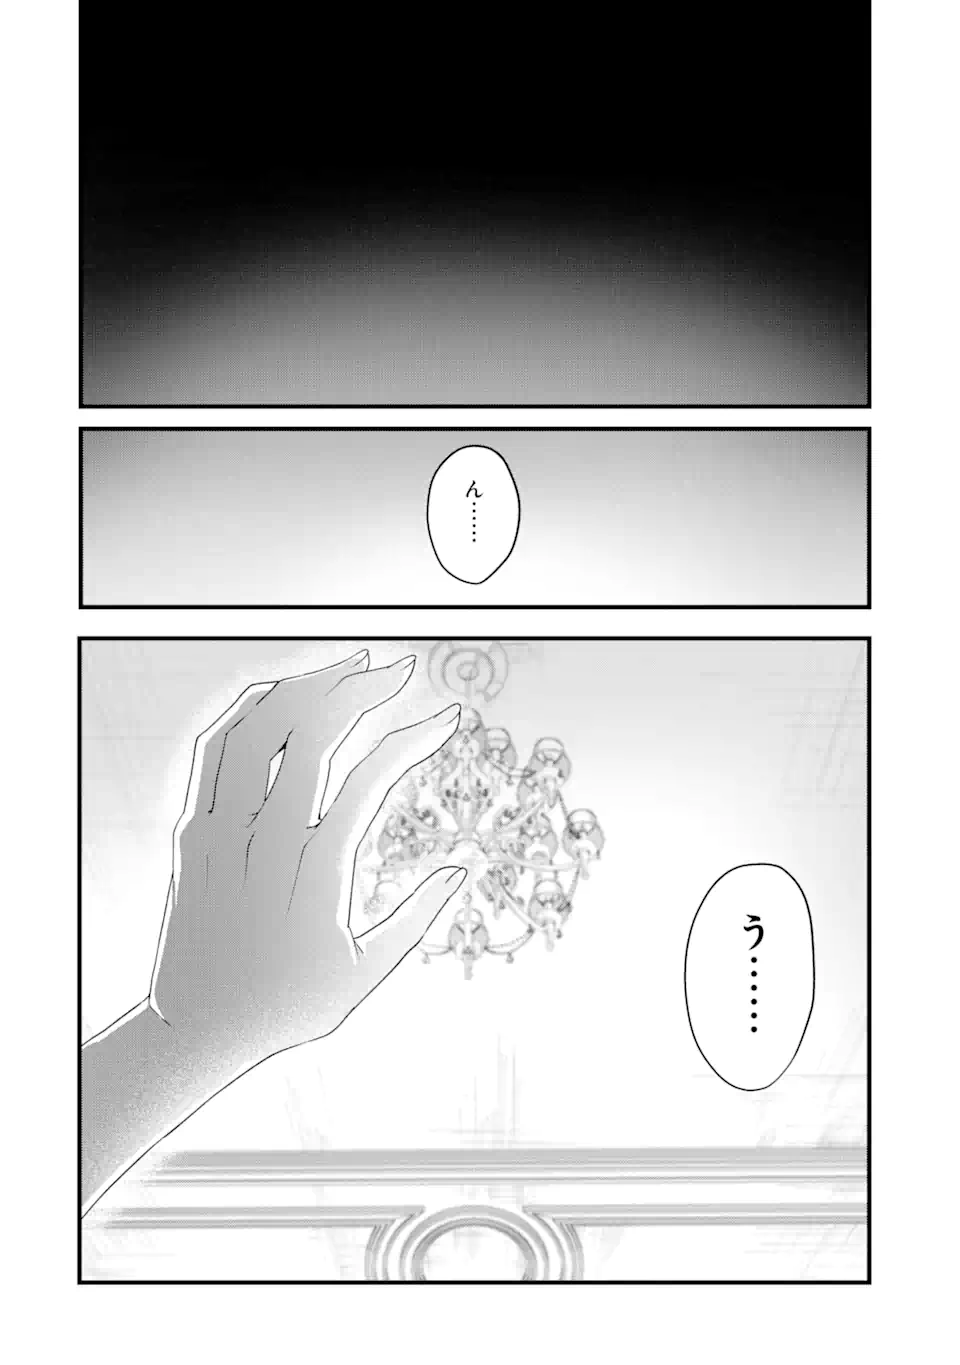 Ousama no Propose - Chapter 1.2 - Page 1